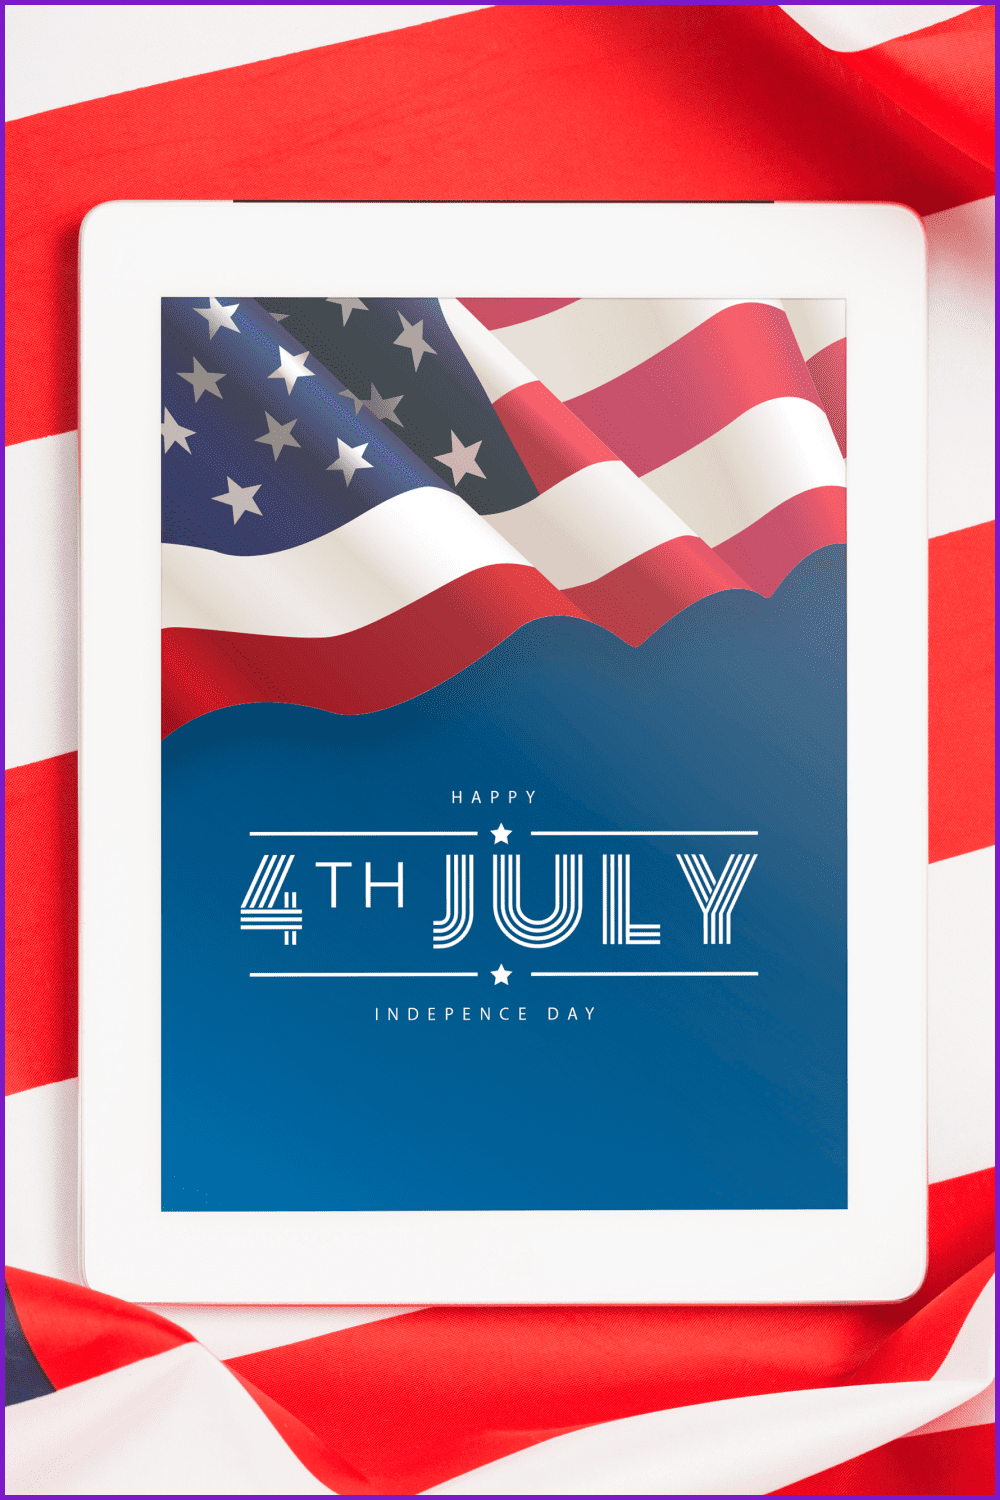 Independence Day 4th of July American Flag Vector Illustration.